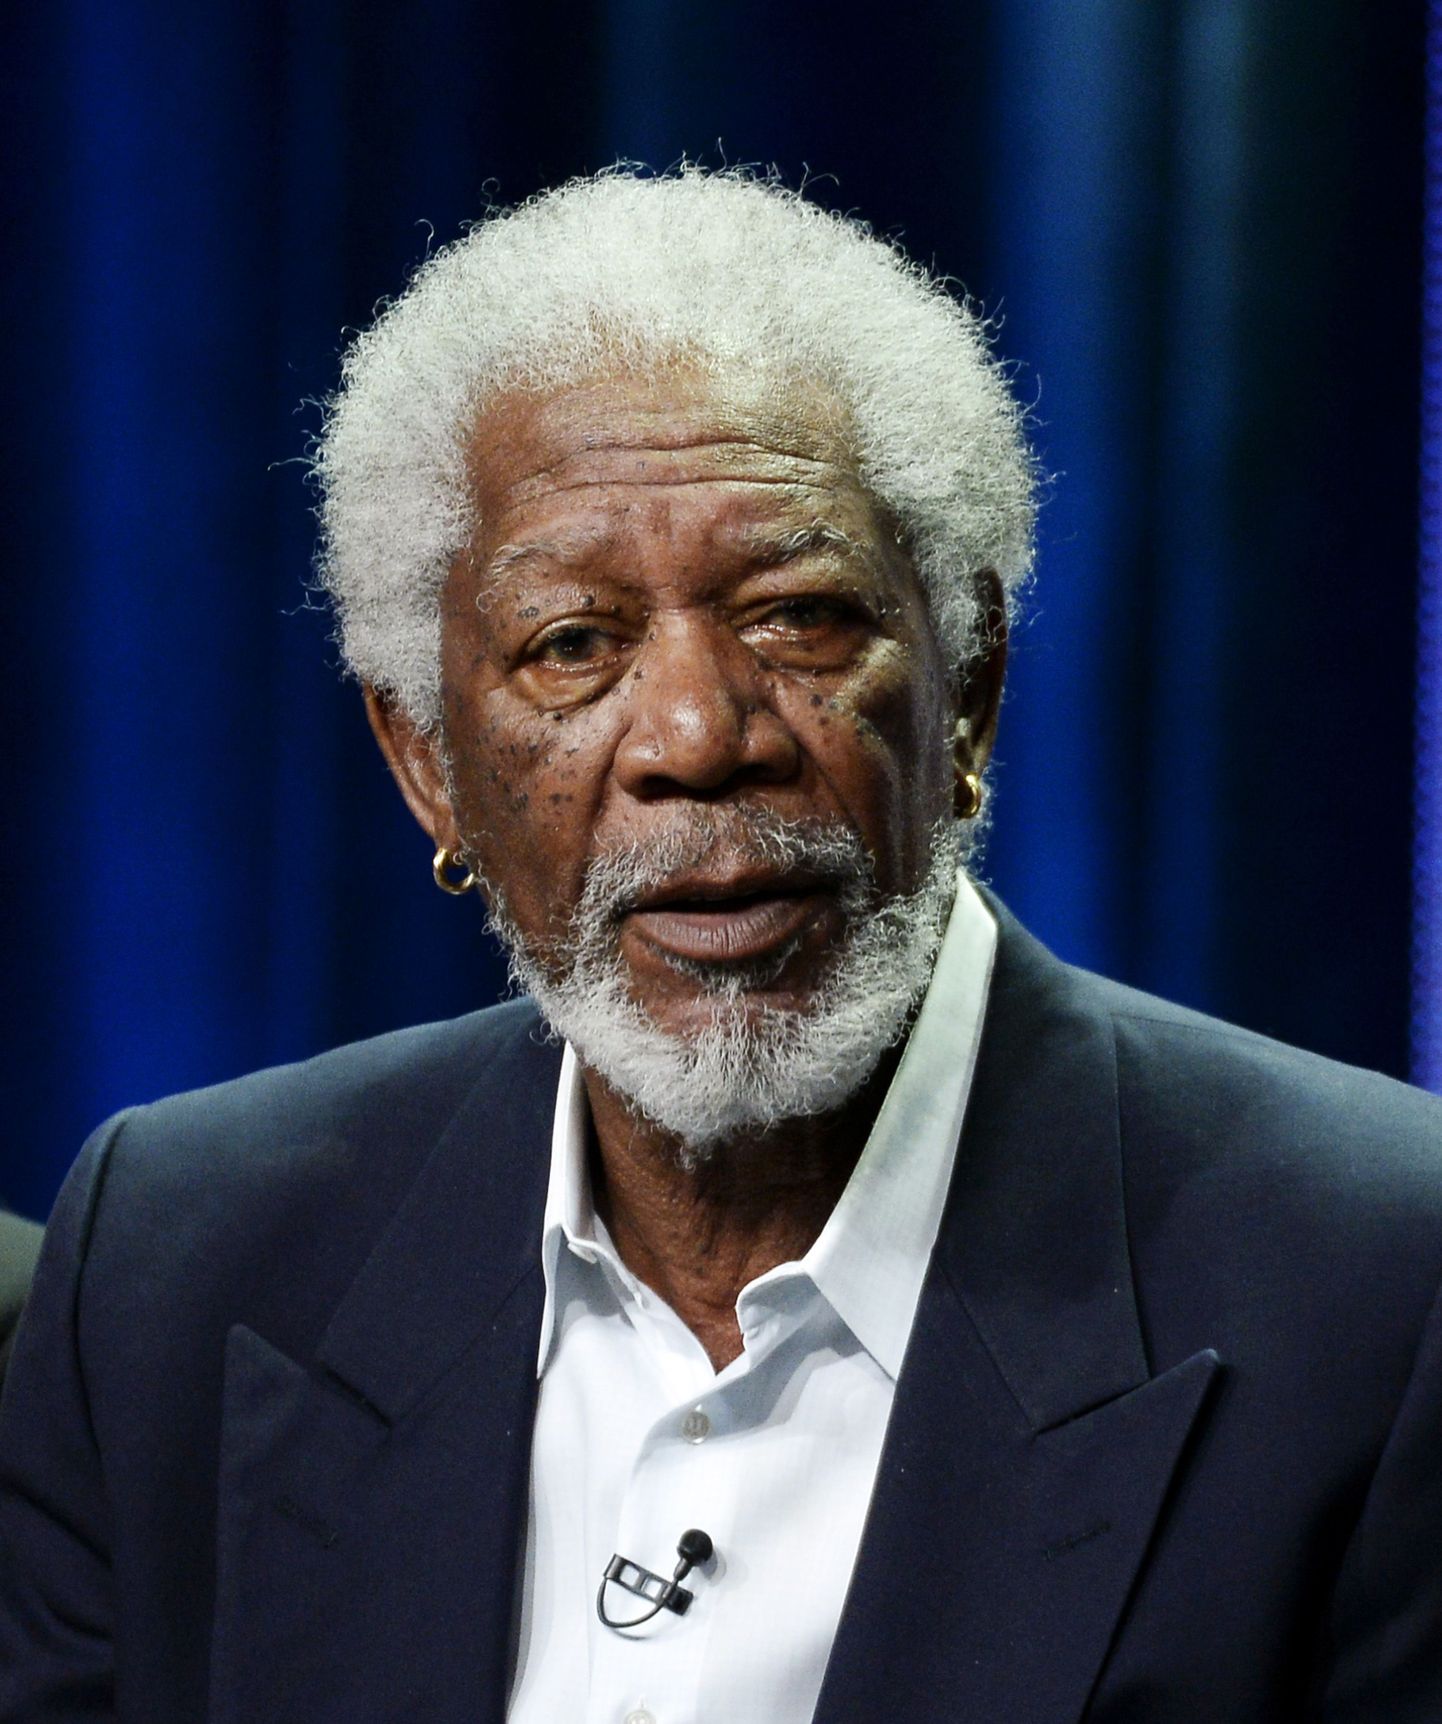 Executive producer Morgan Freeman of the new drama series "Madam Secretary' participates in a panel during CBS network's portion of the 2014 Television Critics Association Cable Summer Press Tour in Beverly Hills, California July 17, 2014. (REUTERS/Kevork Djansezian  (UNITED STATES - Tags: ENTERTAINMENT MEDIA SOCIETY HEADSHOT)